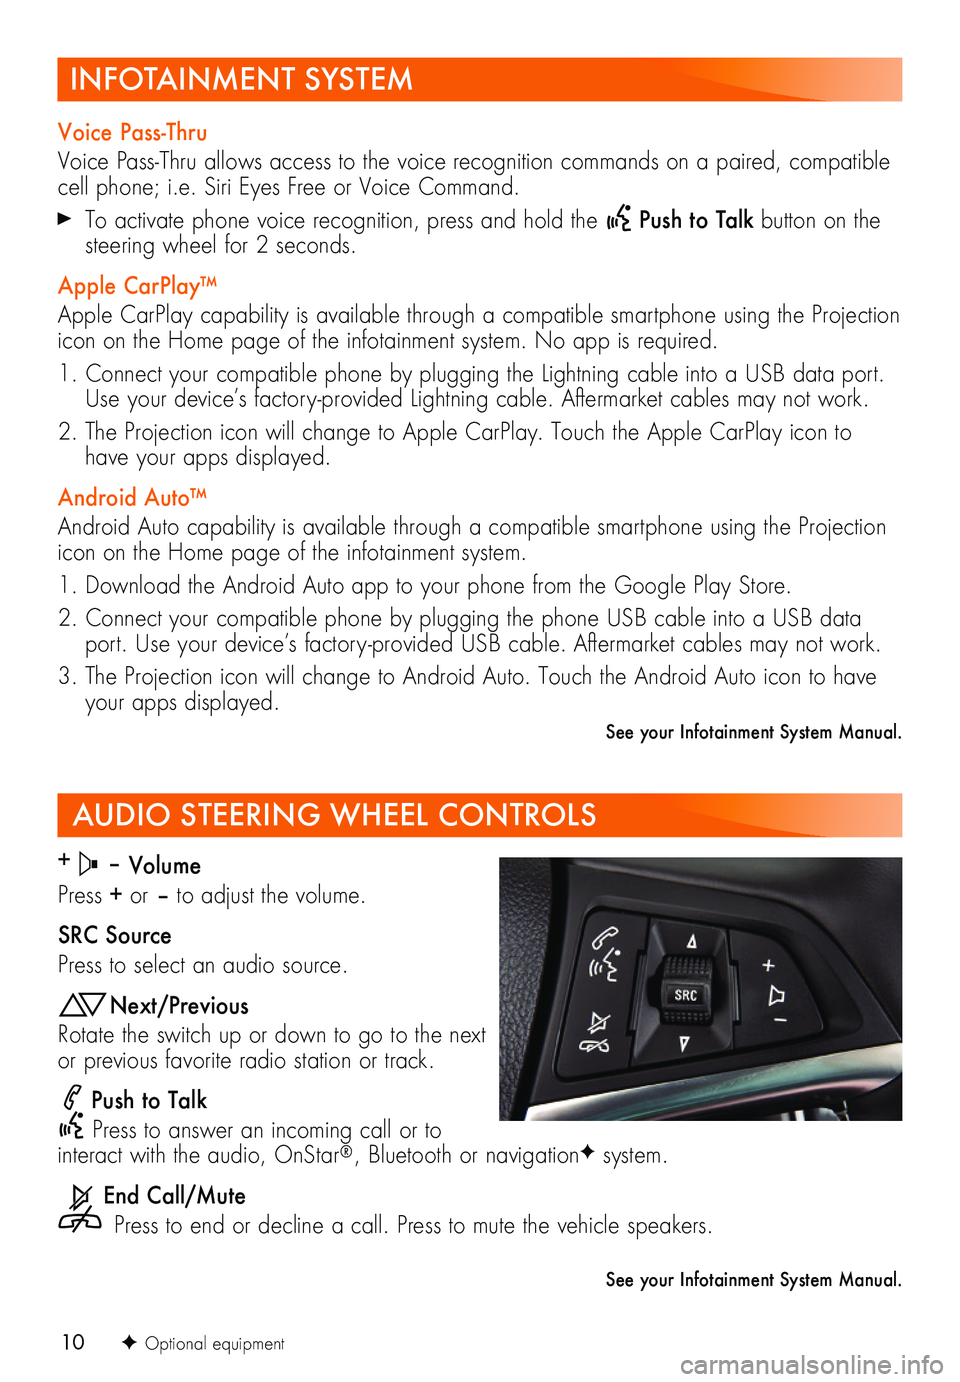 BUICK ENCORE 2019  Get To Know Guide 10
AUDIO STEERING WHEEL CONTROLS
+  – Volume
Press + or – to adjust the volume.
SRC Source
Press to select an audio source.
Next/Previous
Rotate the switch up or down to go to the next or previous